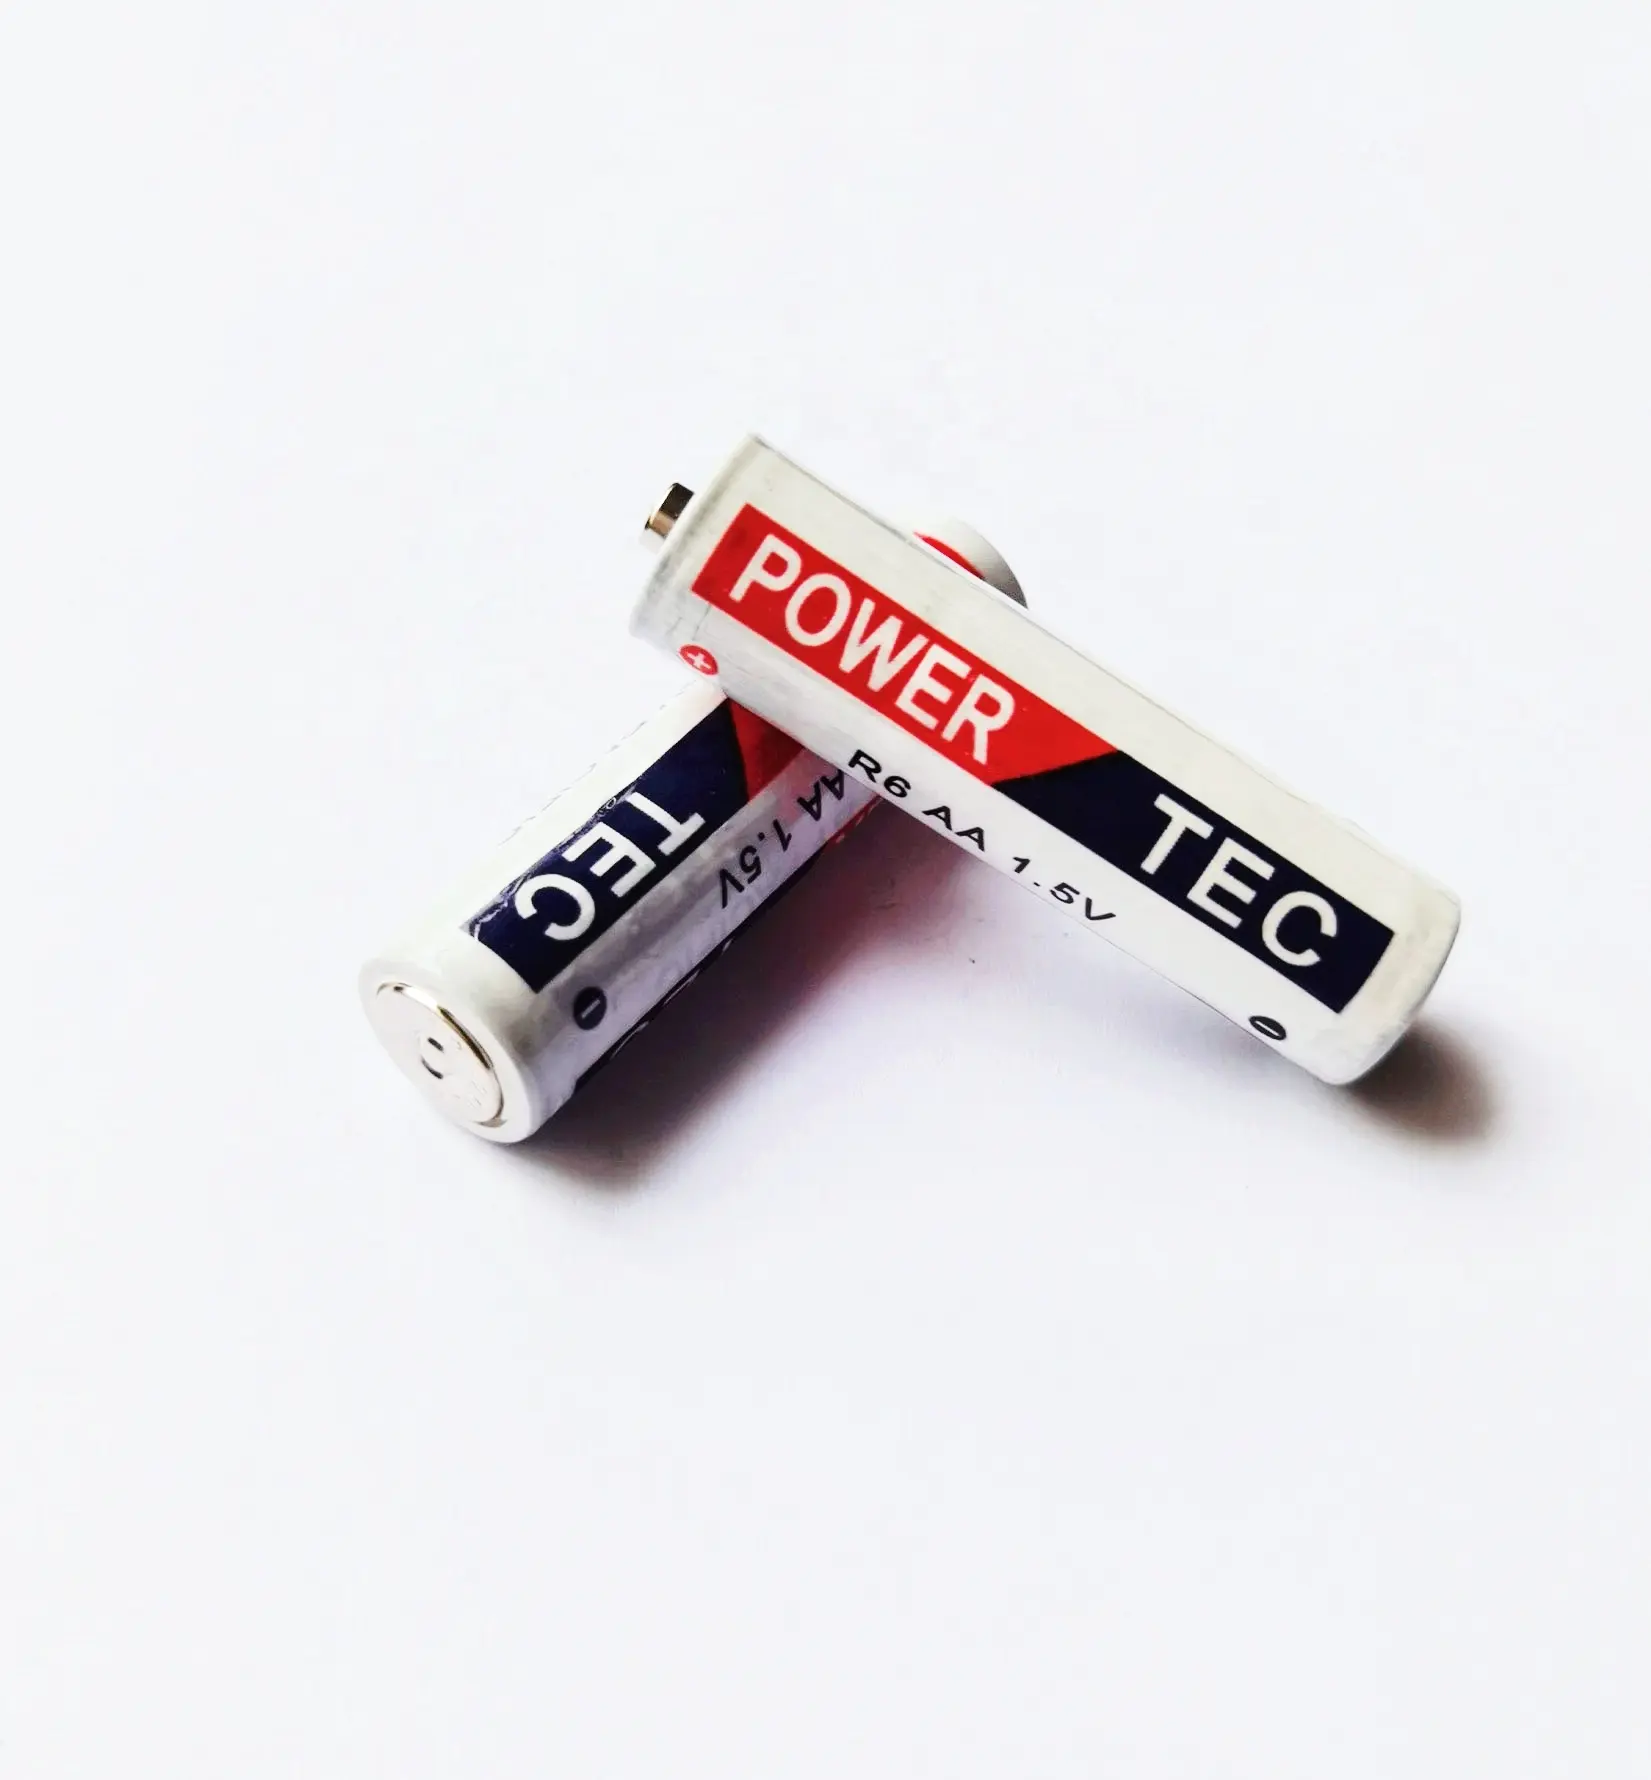 Pin Button Cr 2025 Finger Aaa Double A AA battery Alkaline Batteries For remote control toys